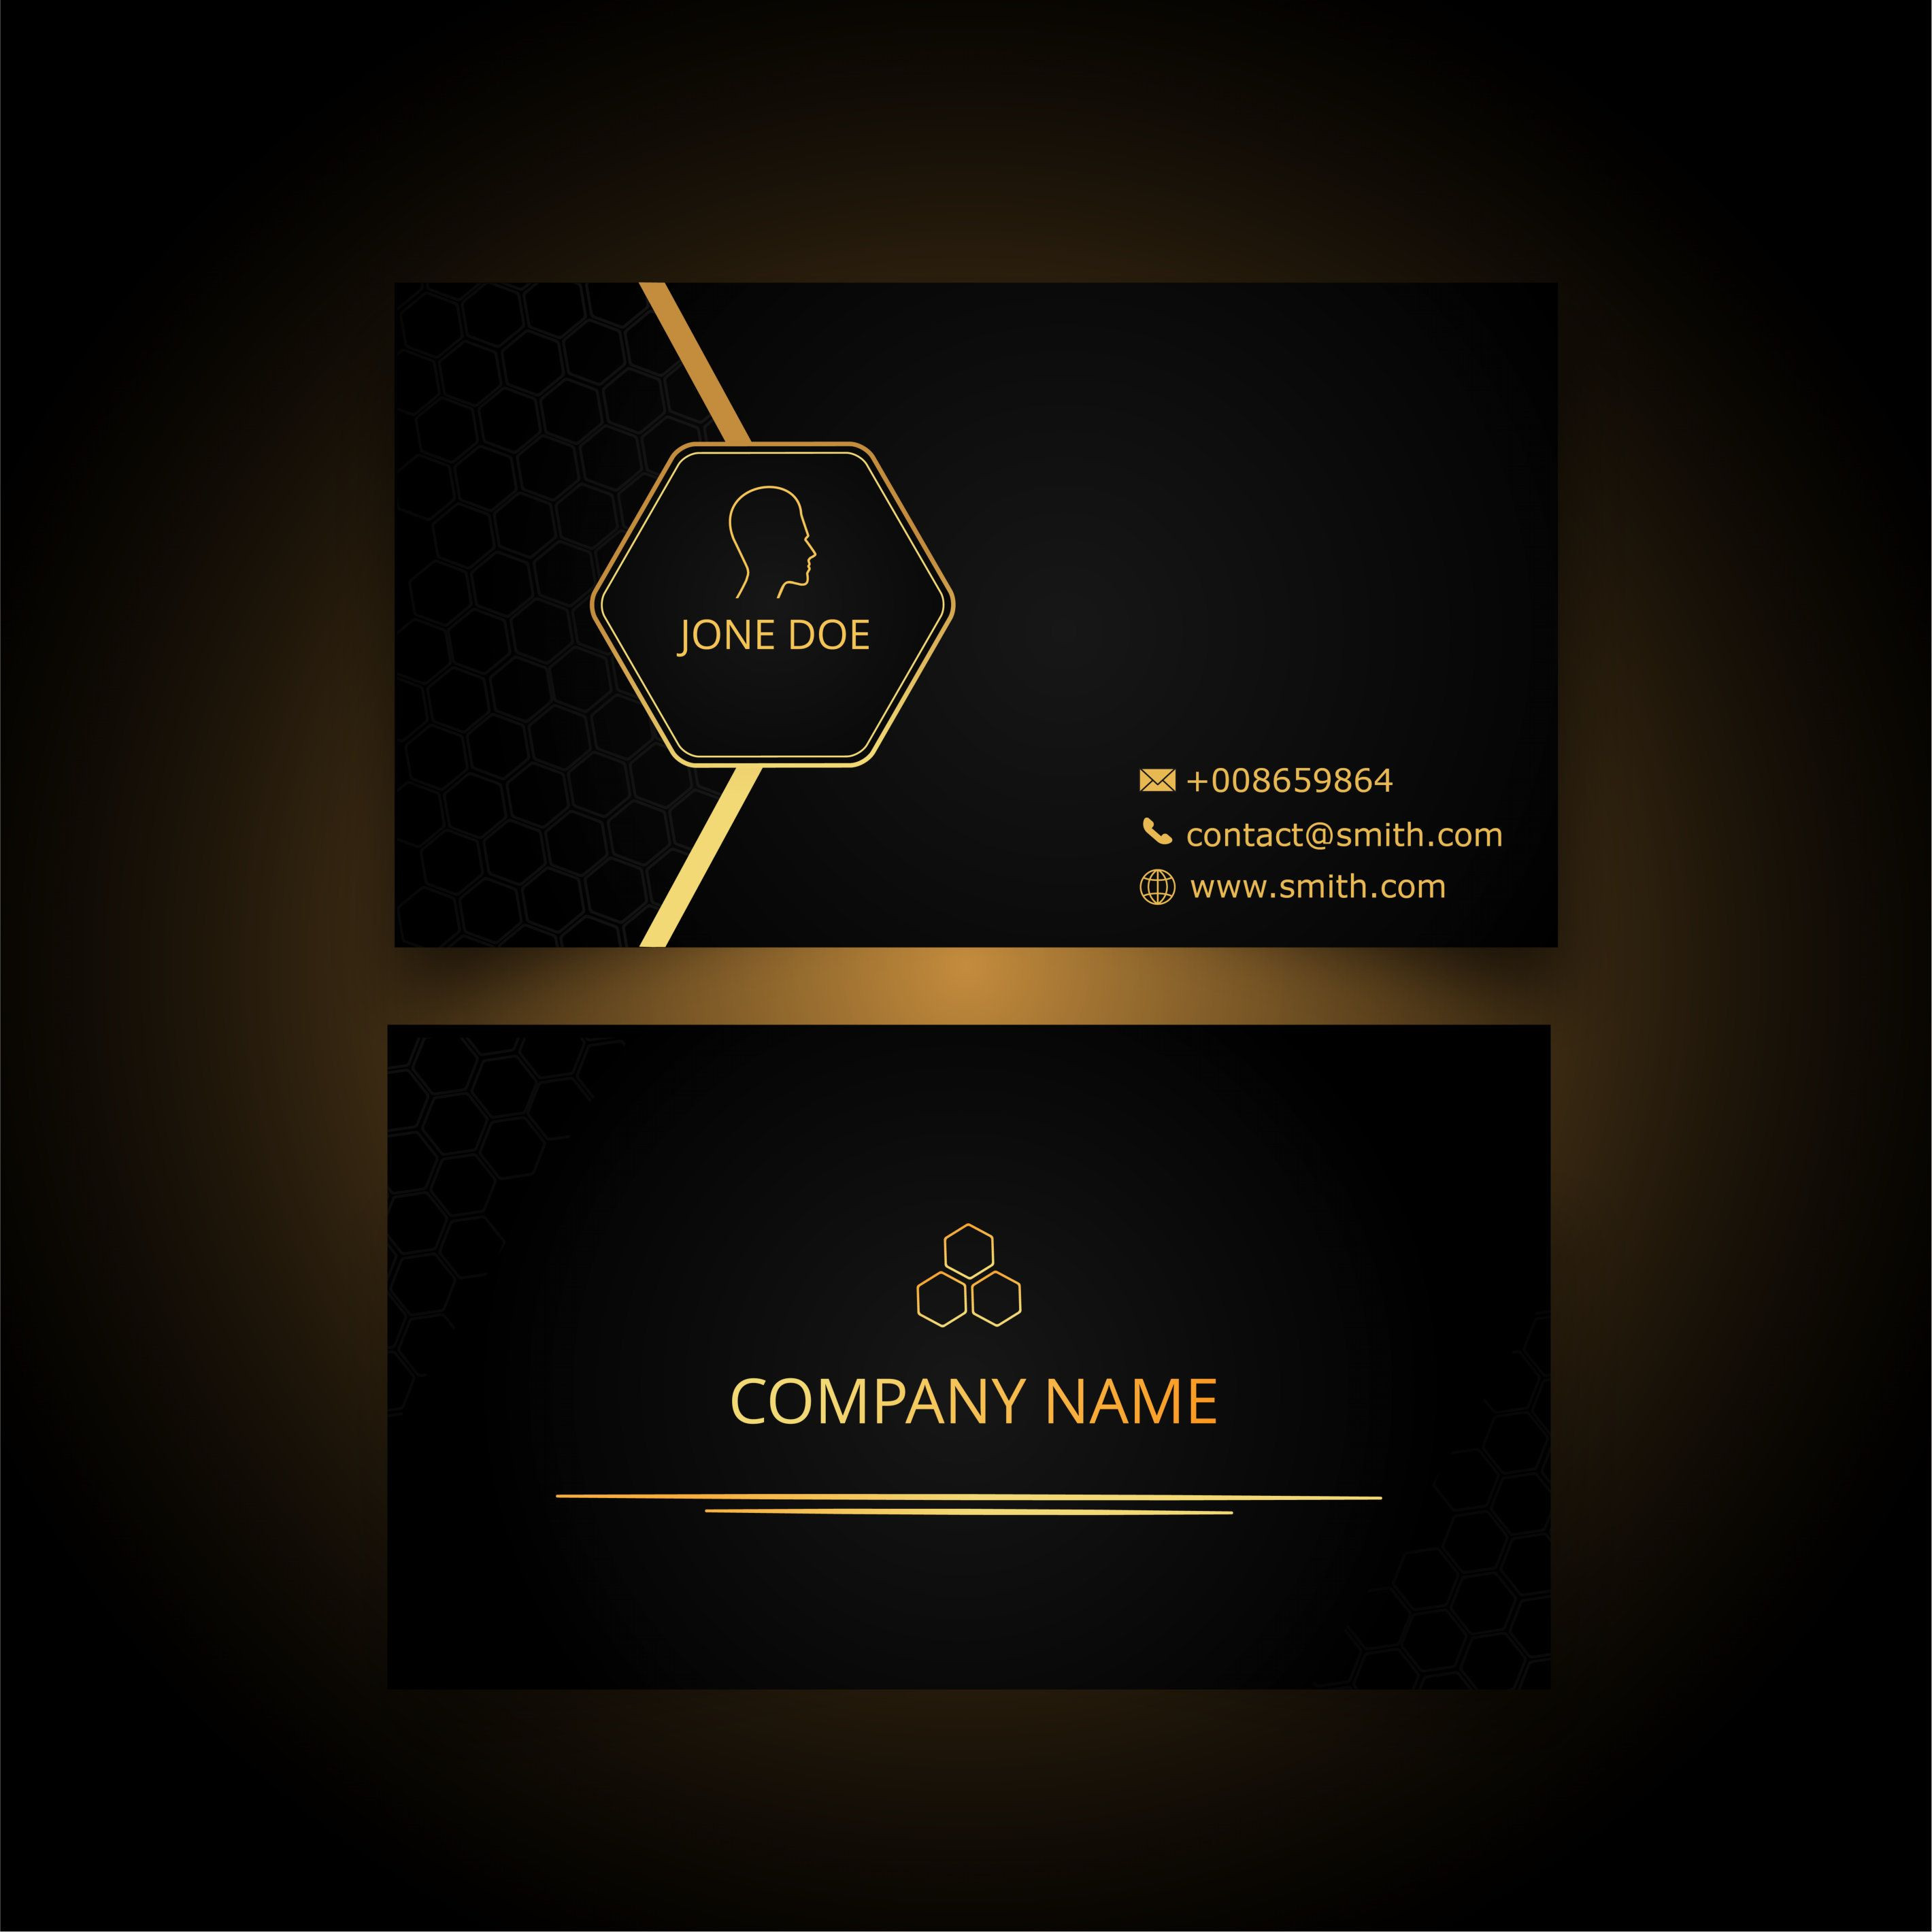 Modern Business Card Template Available On Freepik Of Free Business Card Templates to Print